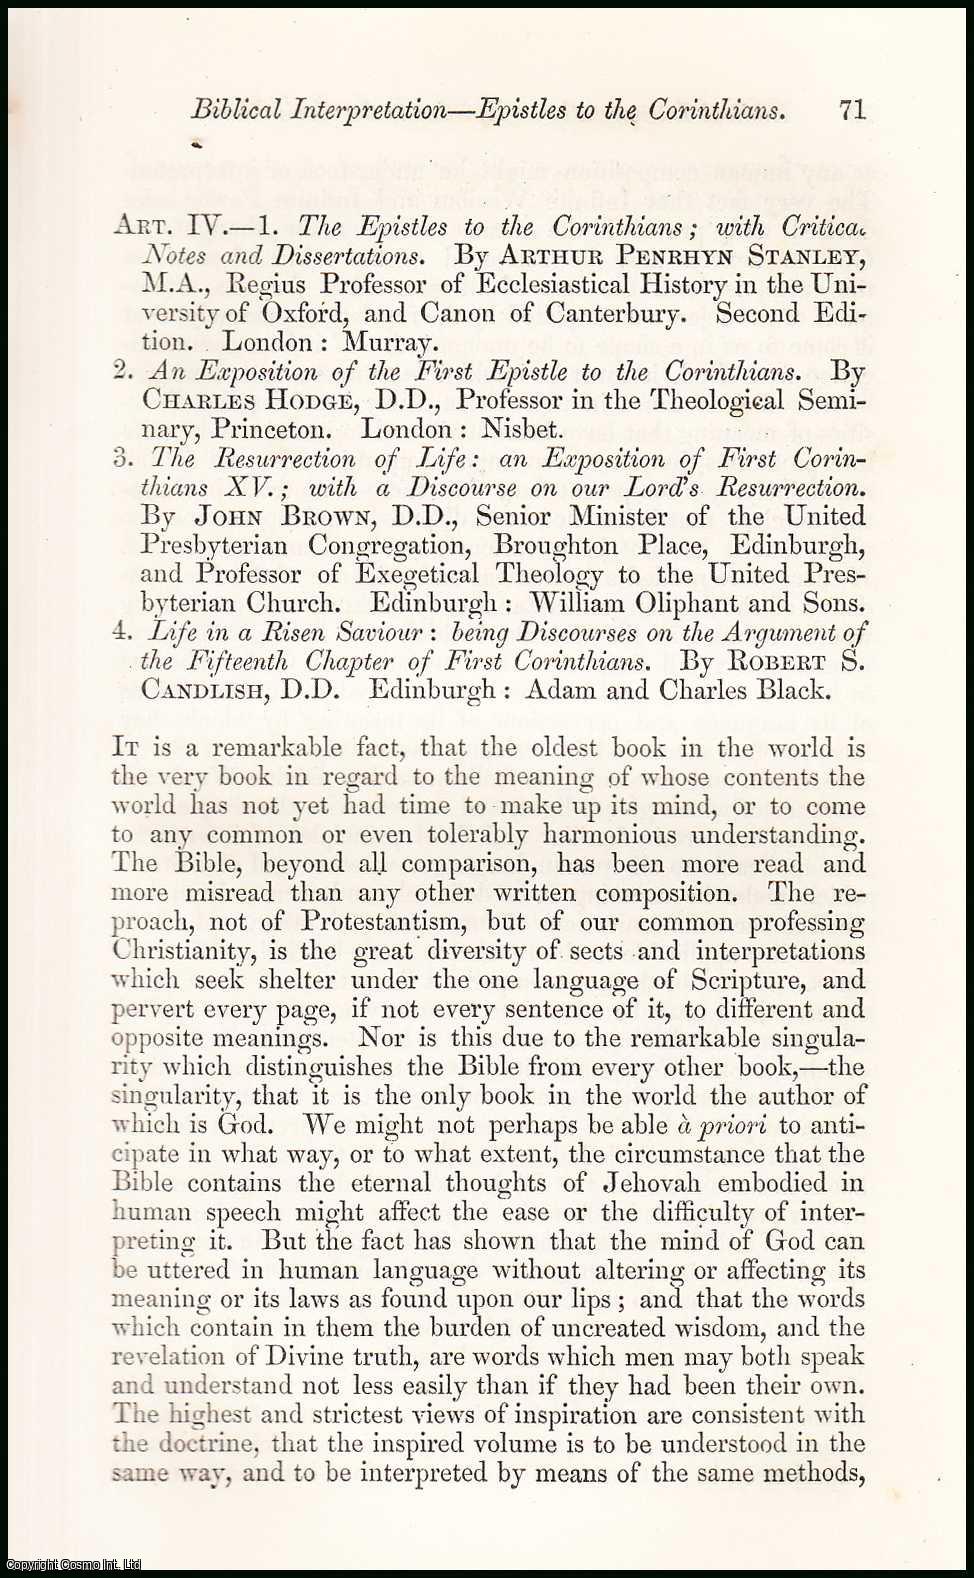 James Bannerman - Biblical Interpretation : Epistles to the Corinthians. An uncommon original article from the North British Review, 1858.